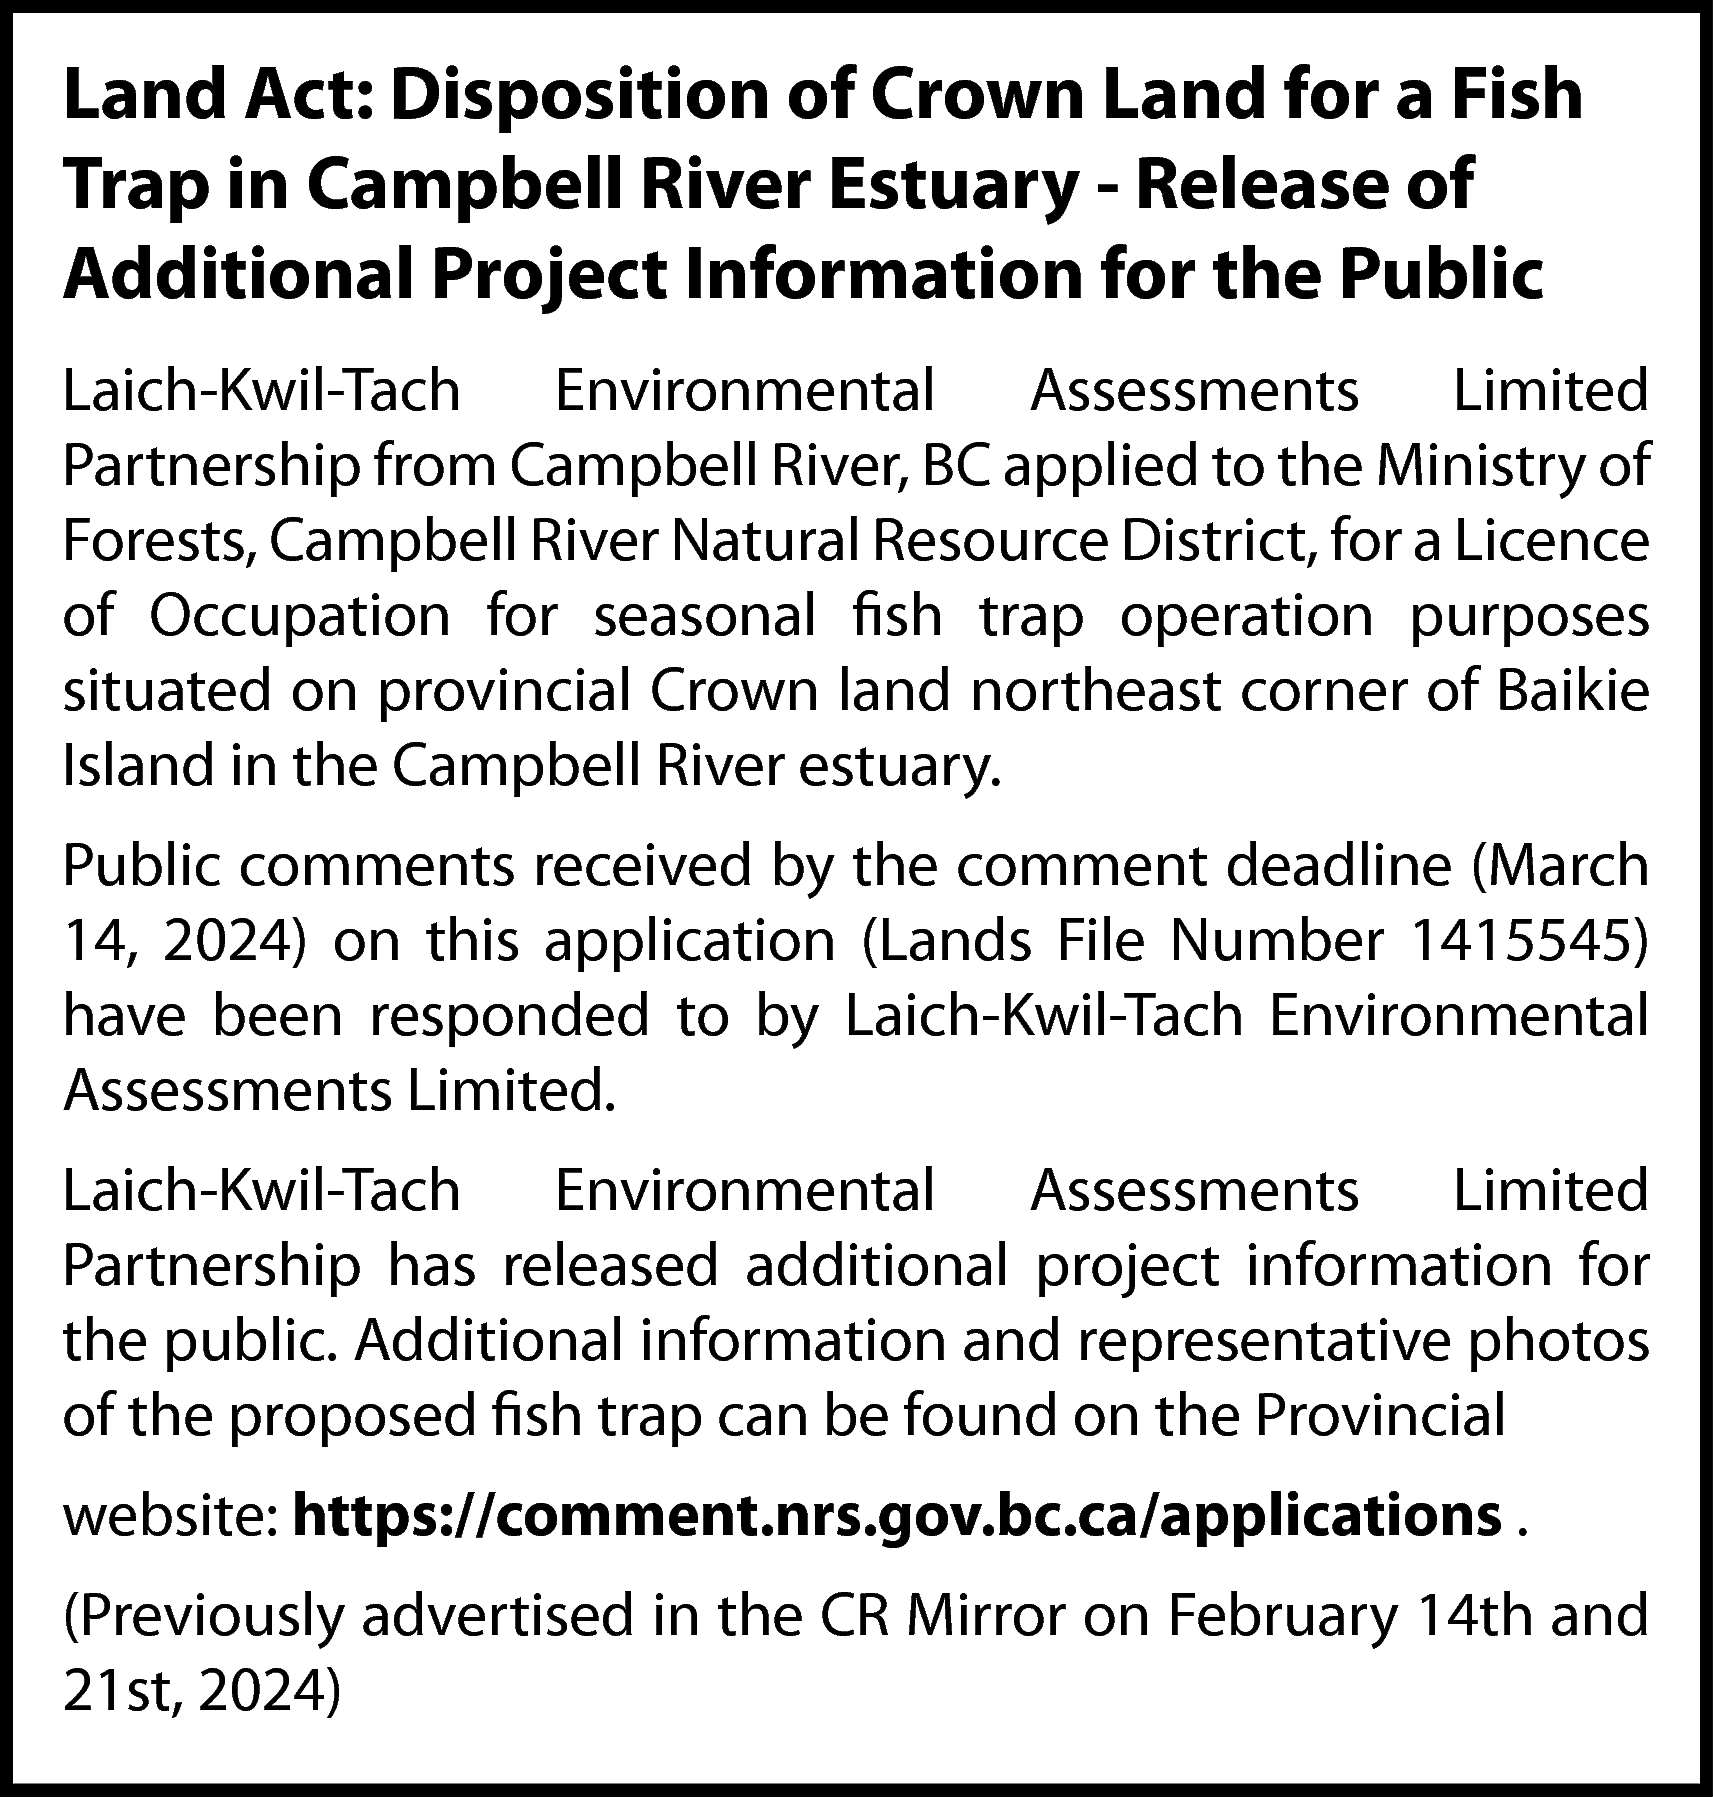 Land Act: Disposition of Crown  Land Act: Disposition of Crown Land for a Fish  Trap in Campbell River Estuary - Release of  Additional Project Information for the Public  Laich-Kwil-Tach Environmental Assessments Limited  Partnership from Campbell River, BC applied to the Ministry of  Forests, Campbell River Natural Resource District, for a Licence  of Occupation for seasonal fish trap operation purposes  situated on provincial Crown land northeast corner of Baikie  Island in the Campbell River estuary.  Public comments received by the comment deadline (March  14, 2024) on this application (Lands File Number 1415545)  have been responded to by Laich-Kwil-Tach Environmental  Assessments Limited.  Laich-Kwil-Tach Environmental Assessments Limited  Partnership has released additional project information for  the public. Additional information and representative photos  of the proposed fish trap can be found on the Provincial  website: https://comment.nrs.gov.bc.ca/applications .  (Previously advertised in the CR Mirror on February 14th and  21st, 2024)    